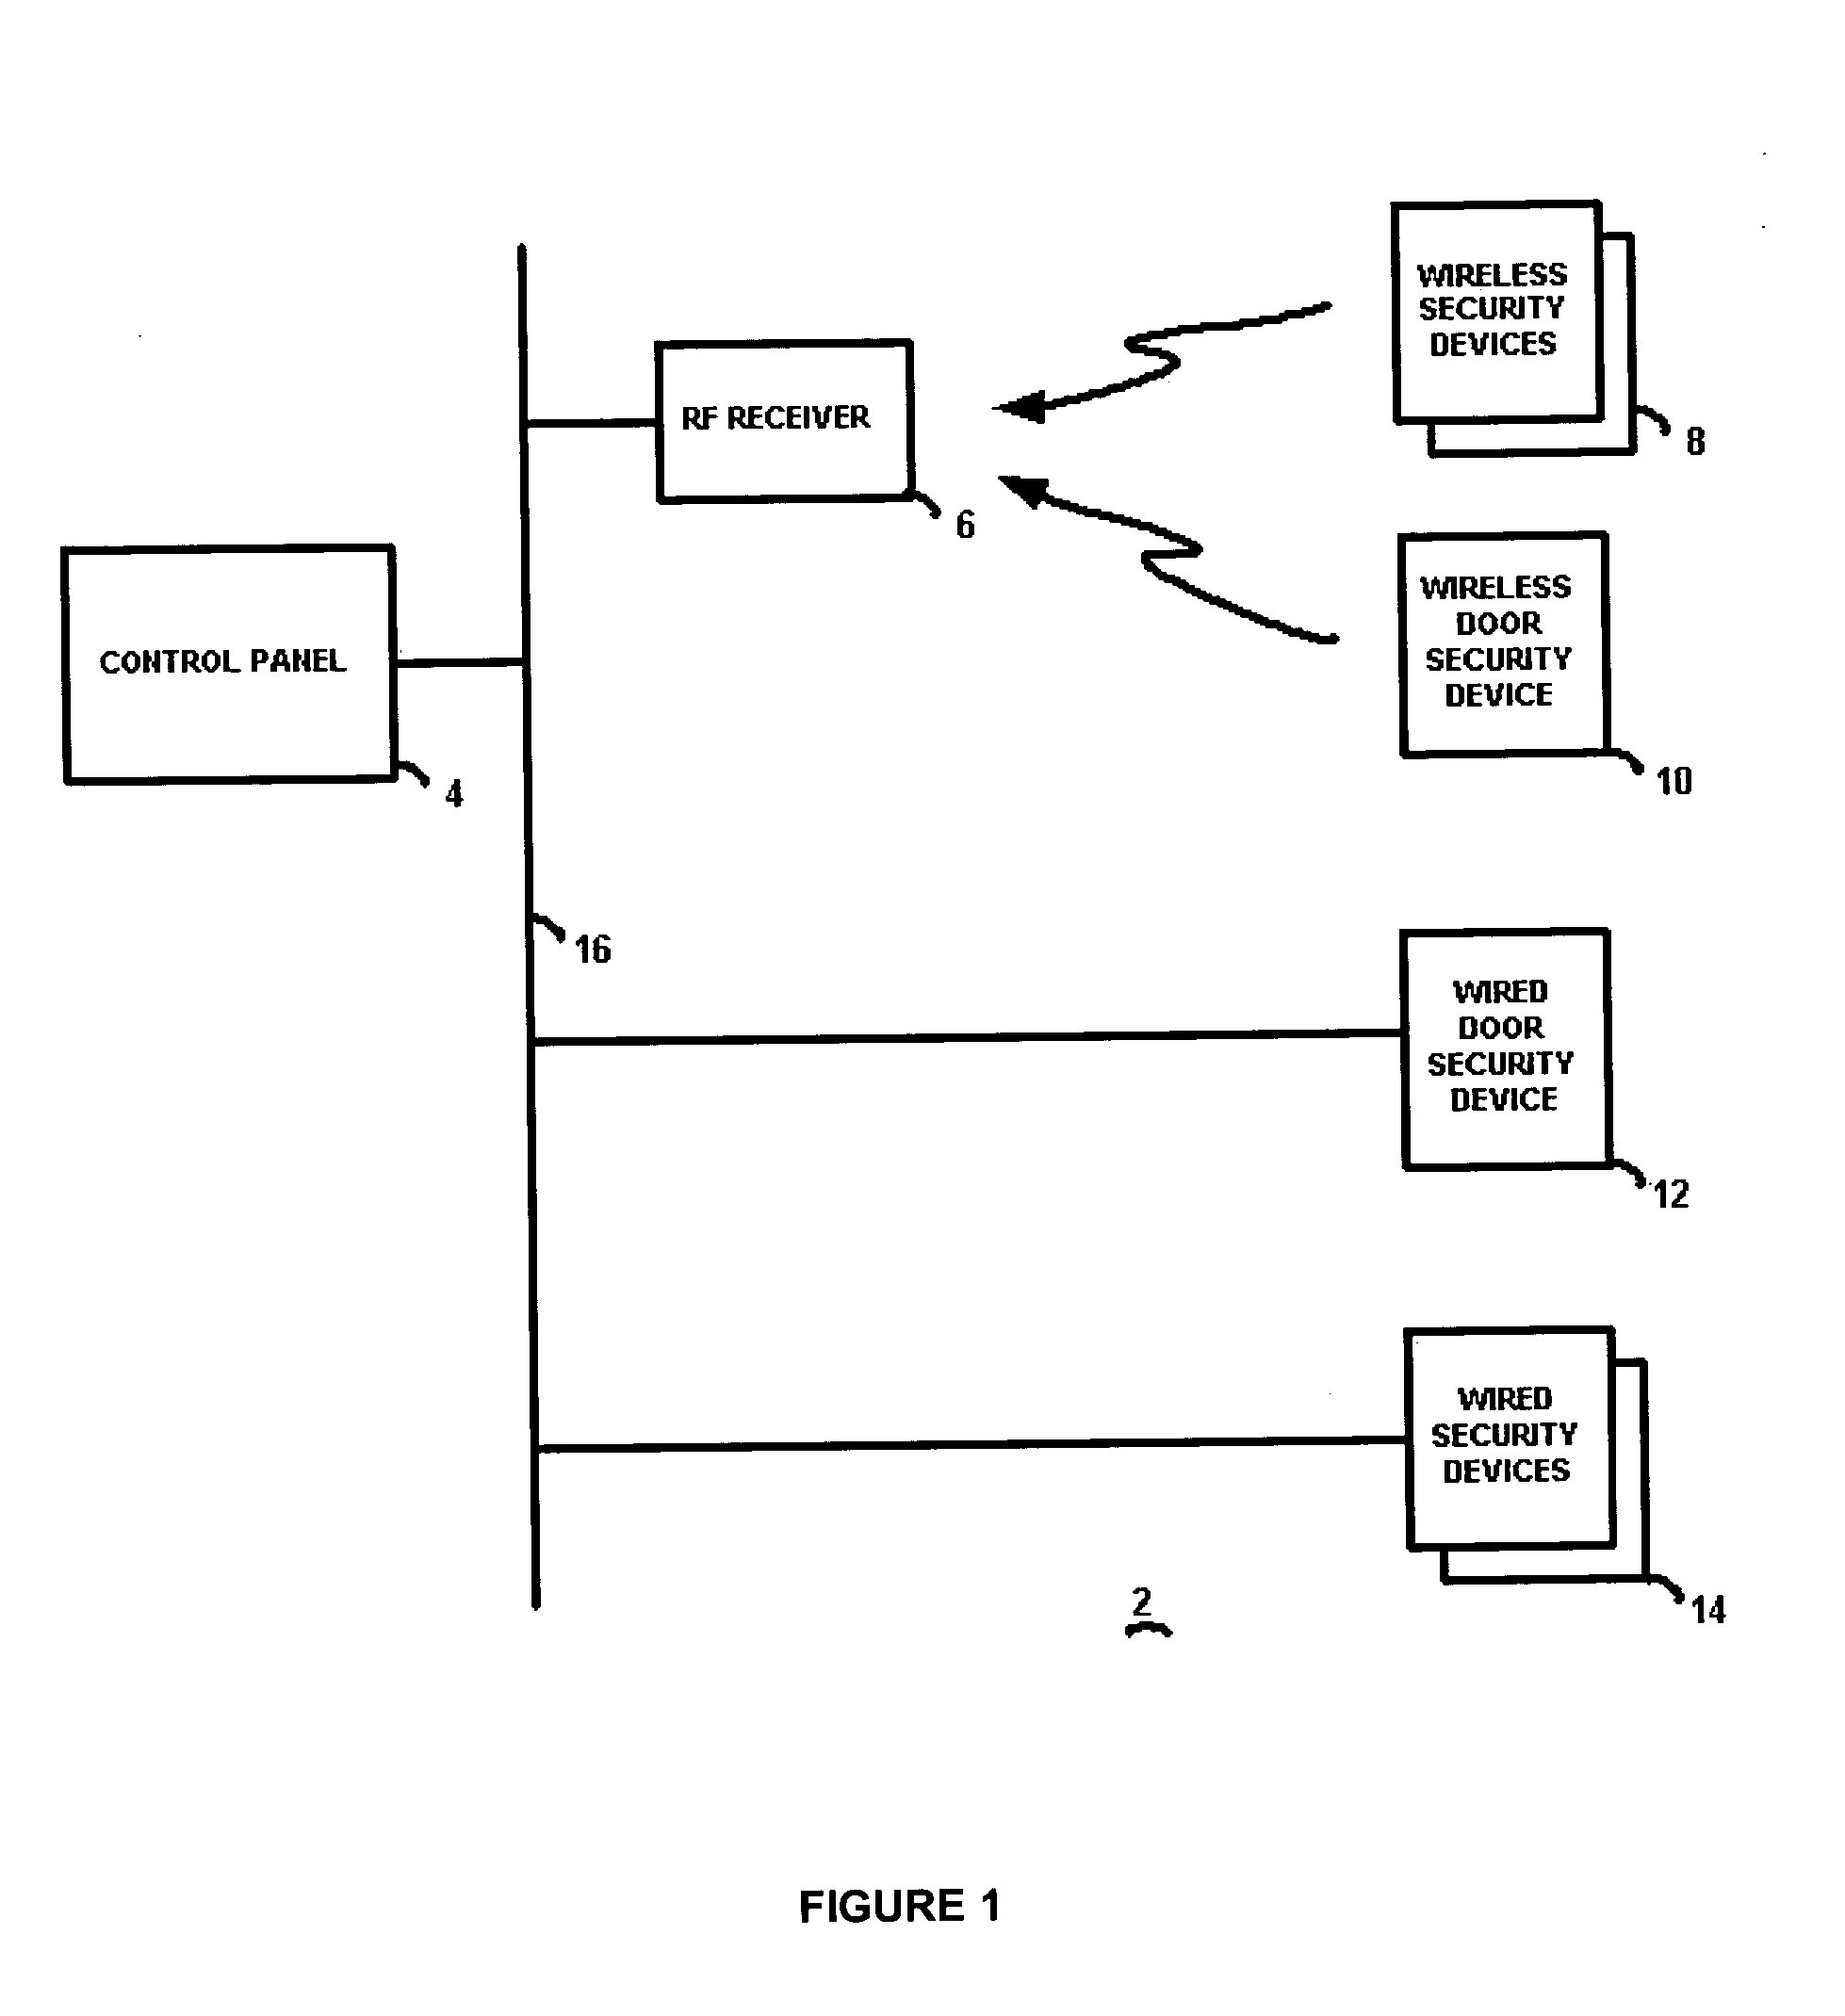 Method of programming security control panels for door entry device compatibility